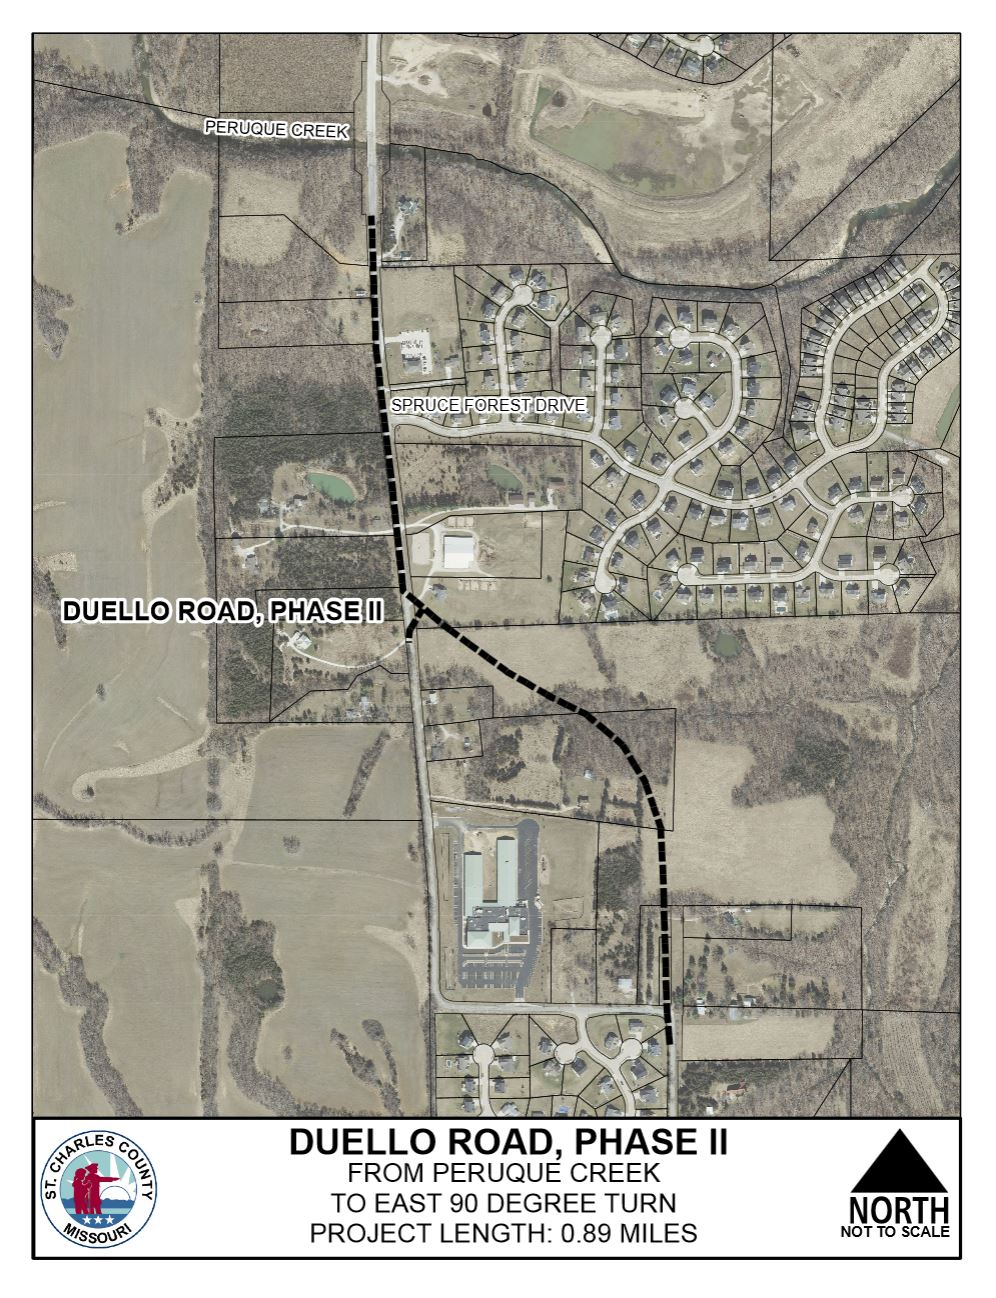 Duello Road Phase II